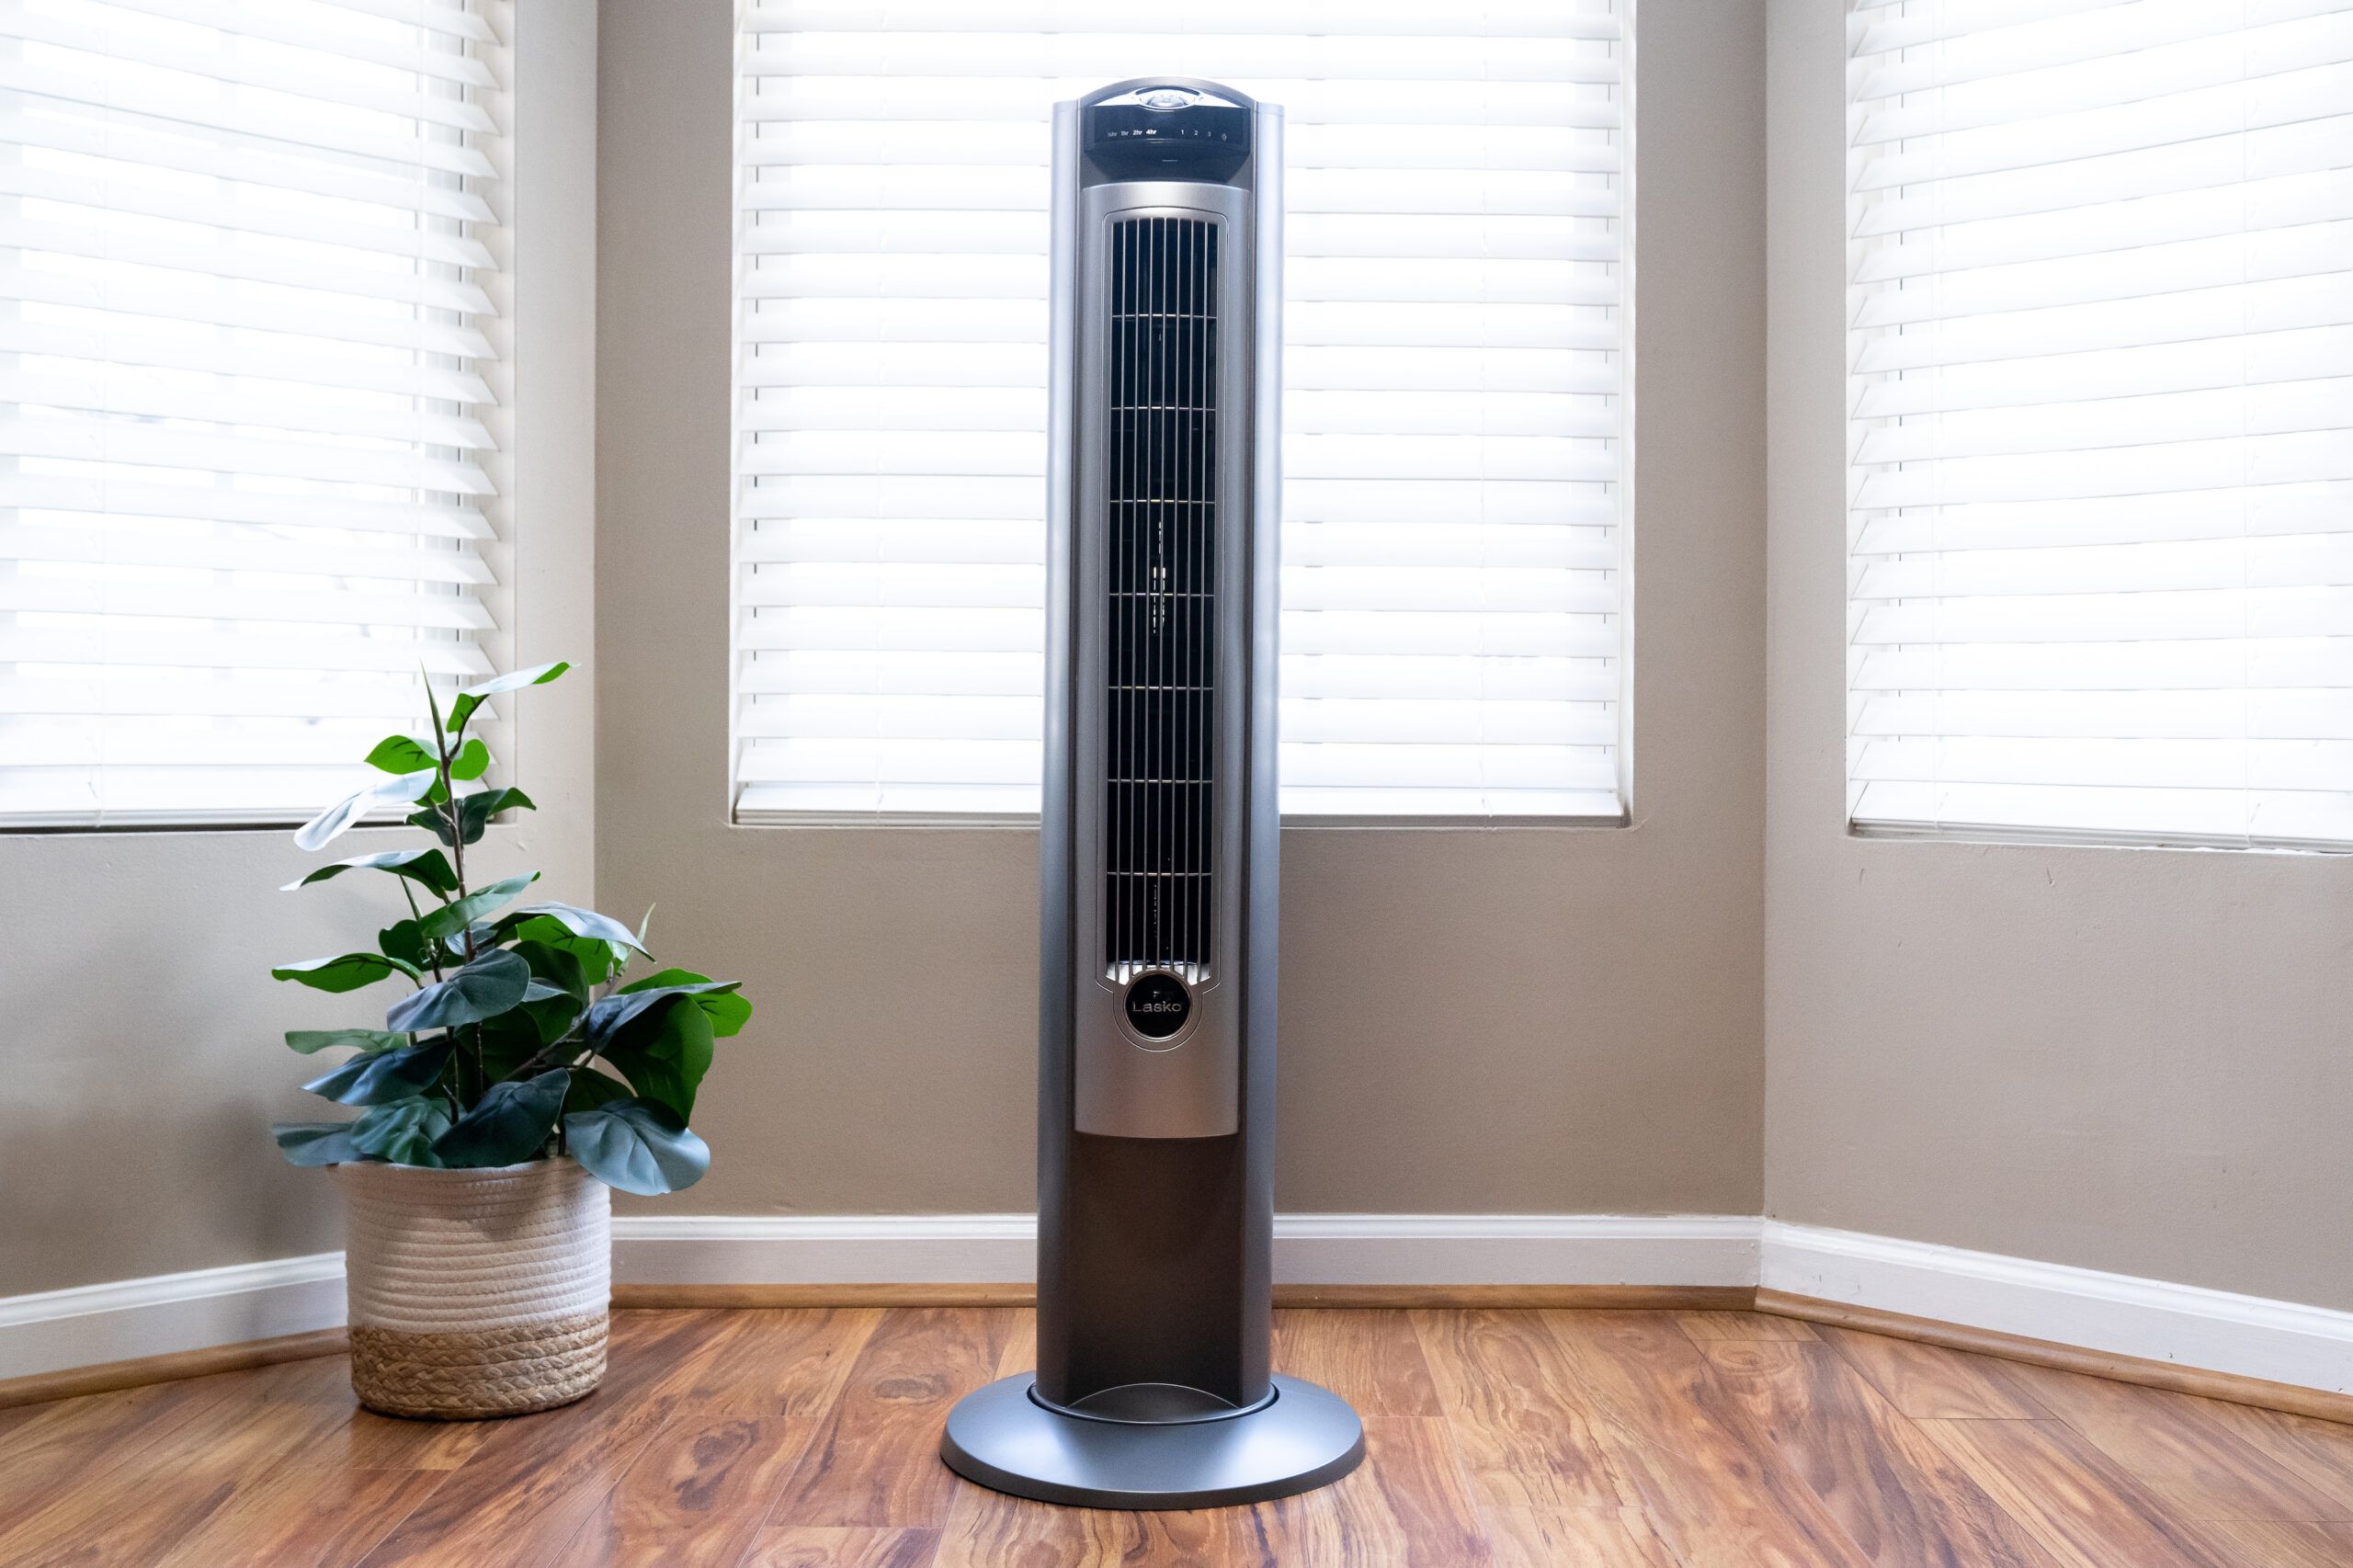 Lasko oscillating tower fan in front of a bay window, tan walls, and standing on a hardwood floor. Lead image for the best tower fan buying guide.